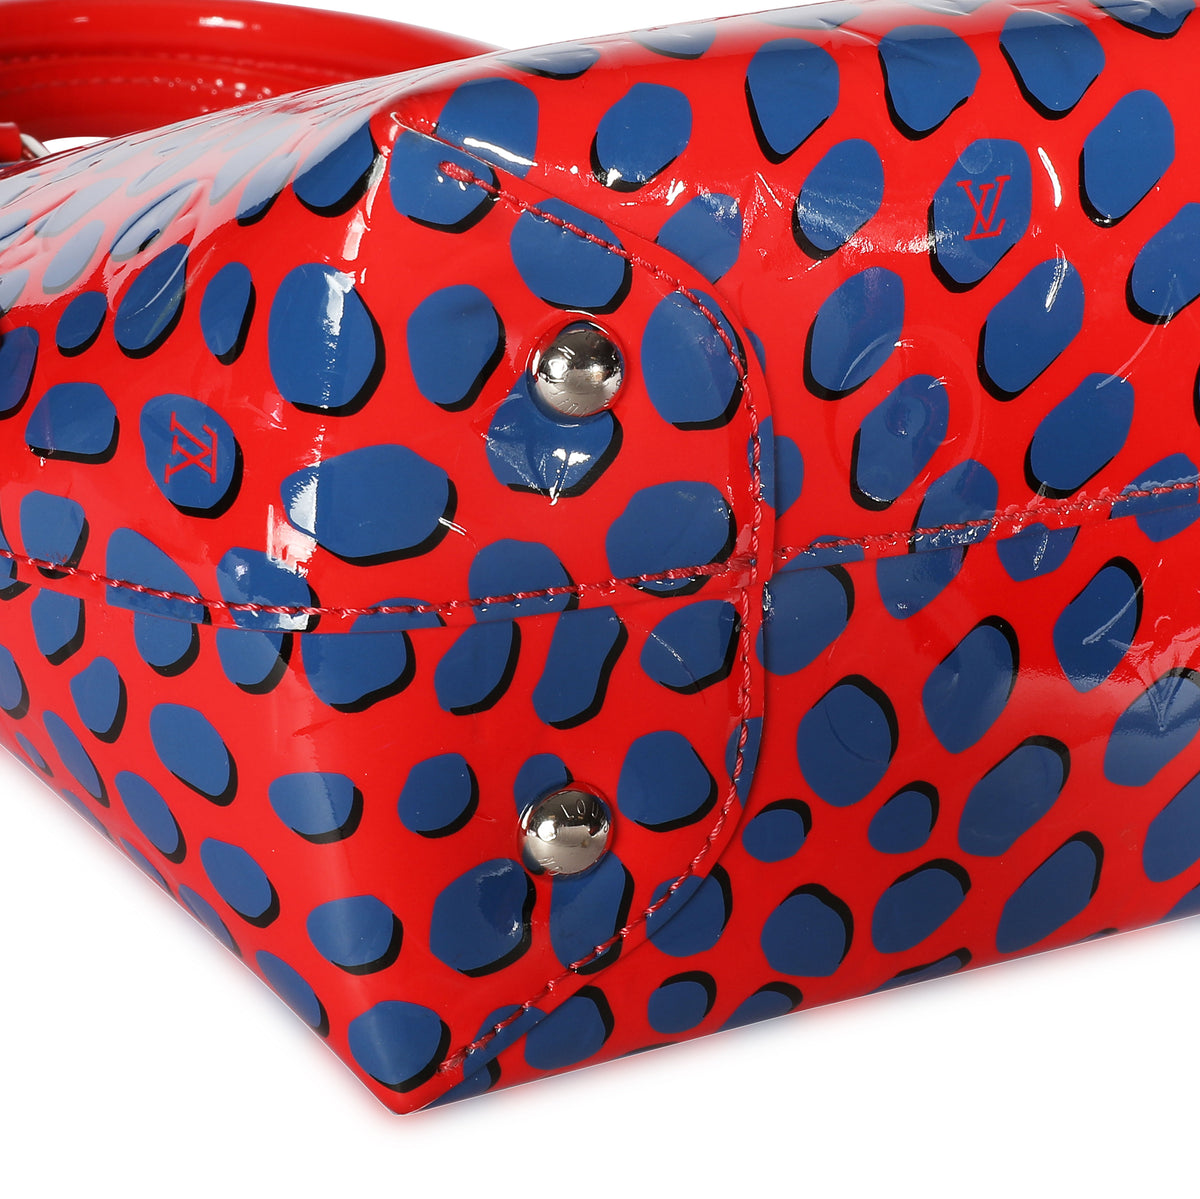 Louis Vuitton Red Vernis Jungle Dots Open Tote Blue Leather Patent